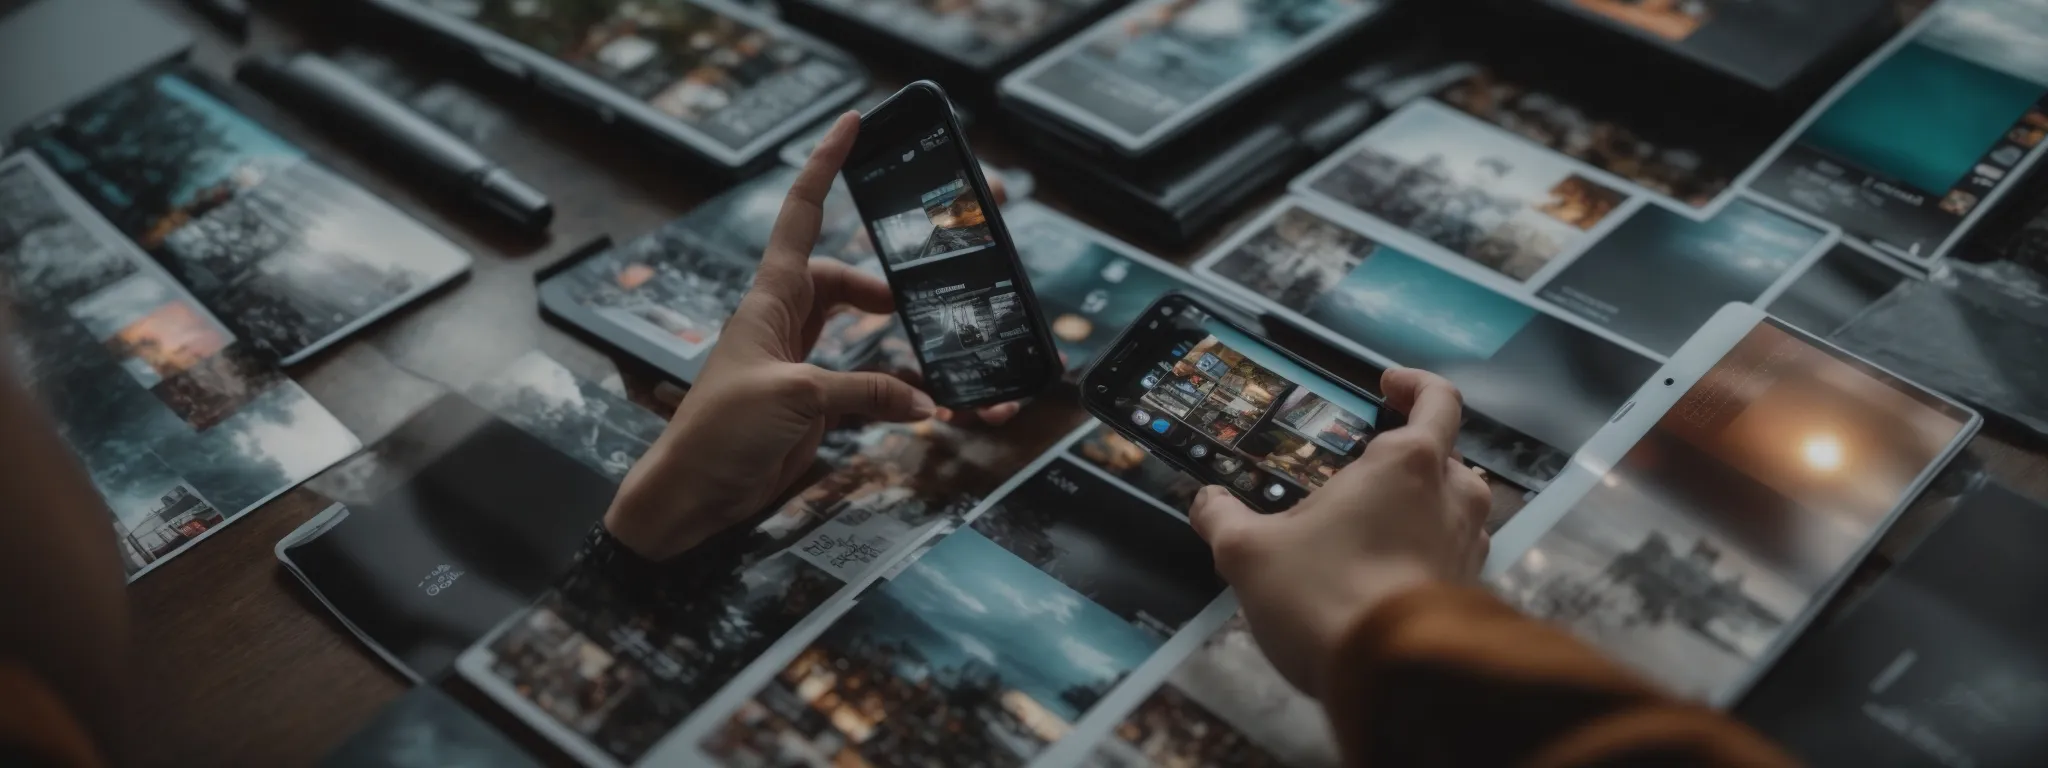 a photographer clicks on a smartphone screen, displaying their portfolio amidst the icons of various social media apps.